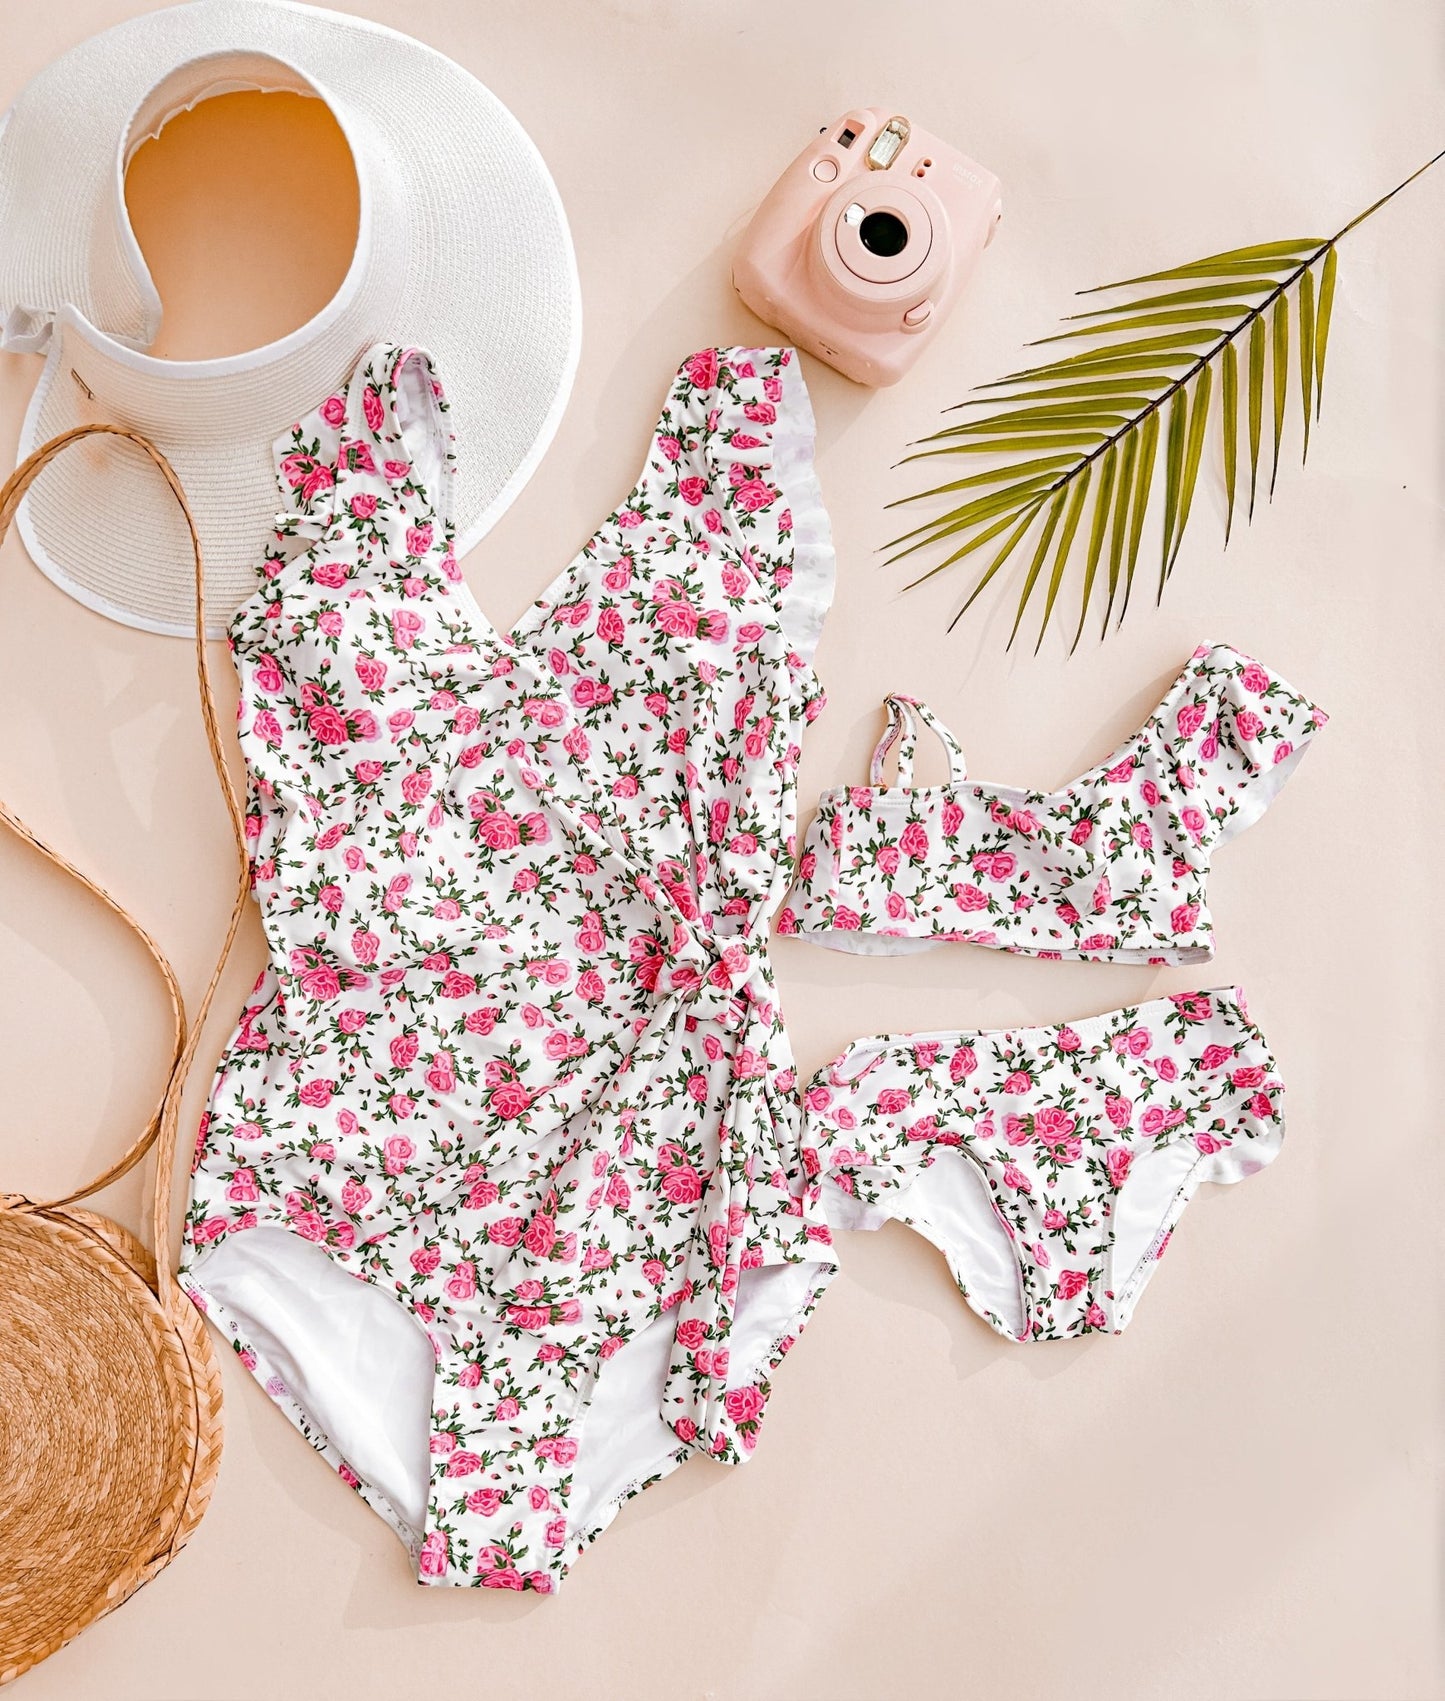 Mini Me Mommy and Me Swimsuit - LITTLE MIA BELLA